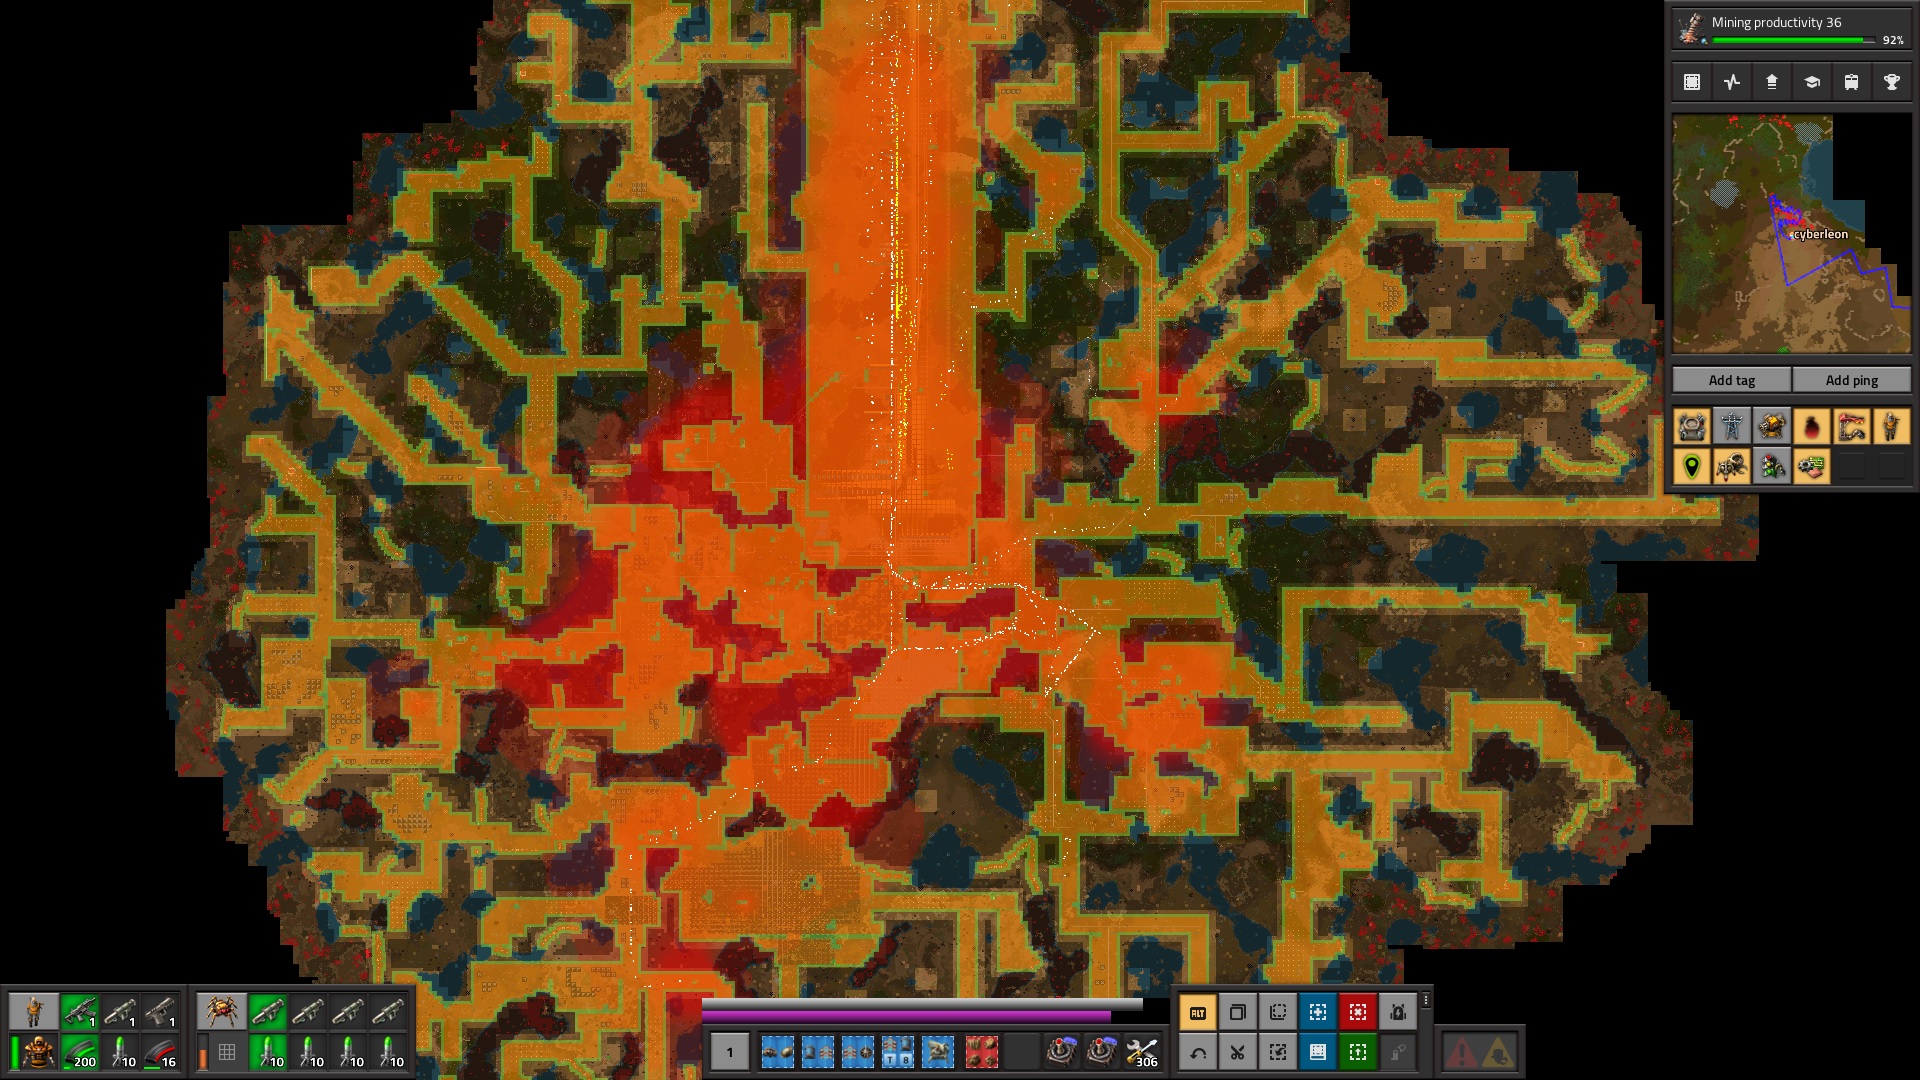 My map at max zoom out. There are far more ressources inside the border, but my attempt was to never let the pollution cloud hit the biter camps, so I only need 2 lines of lasertowers that are as good as never shooting instead of 6 rows with lasers and flametowers and perma repair.